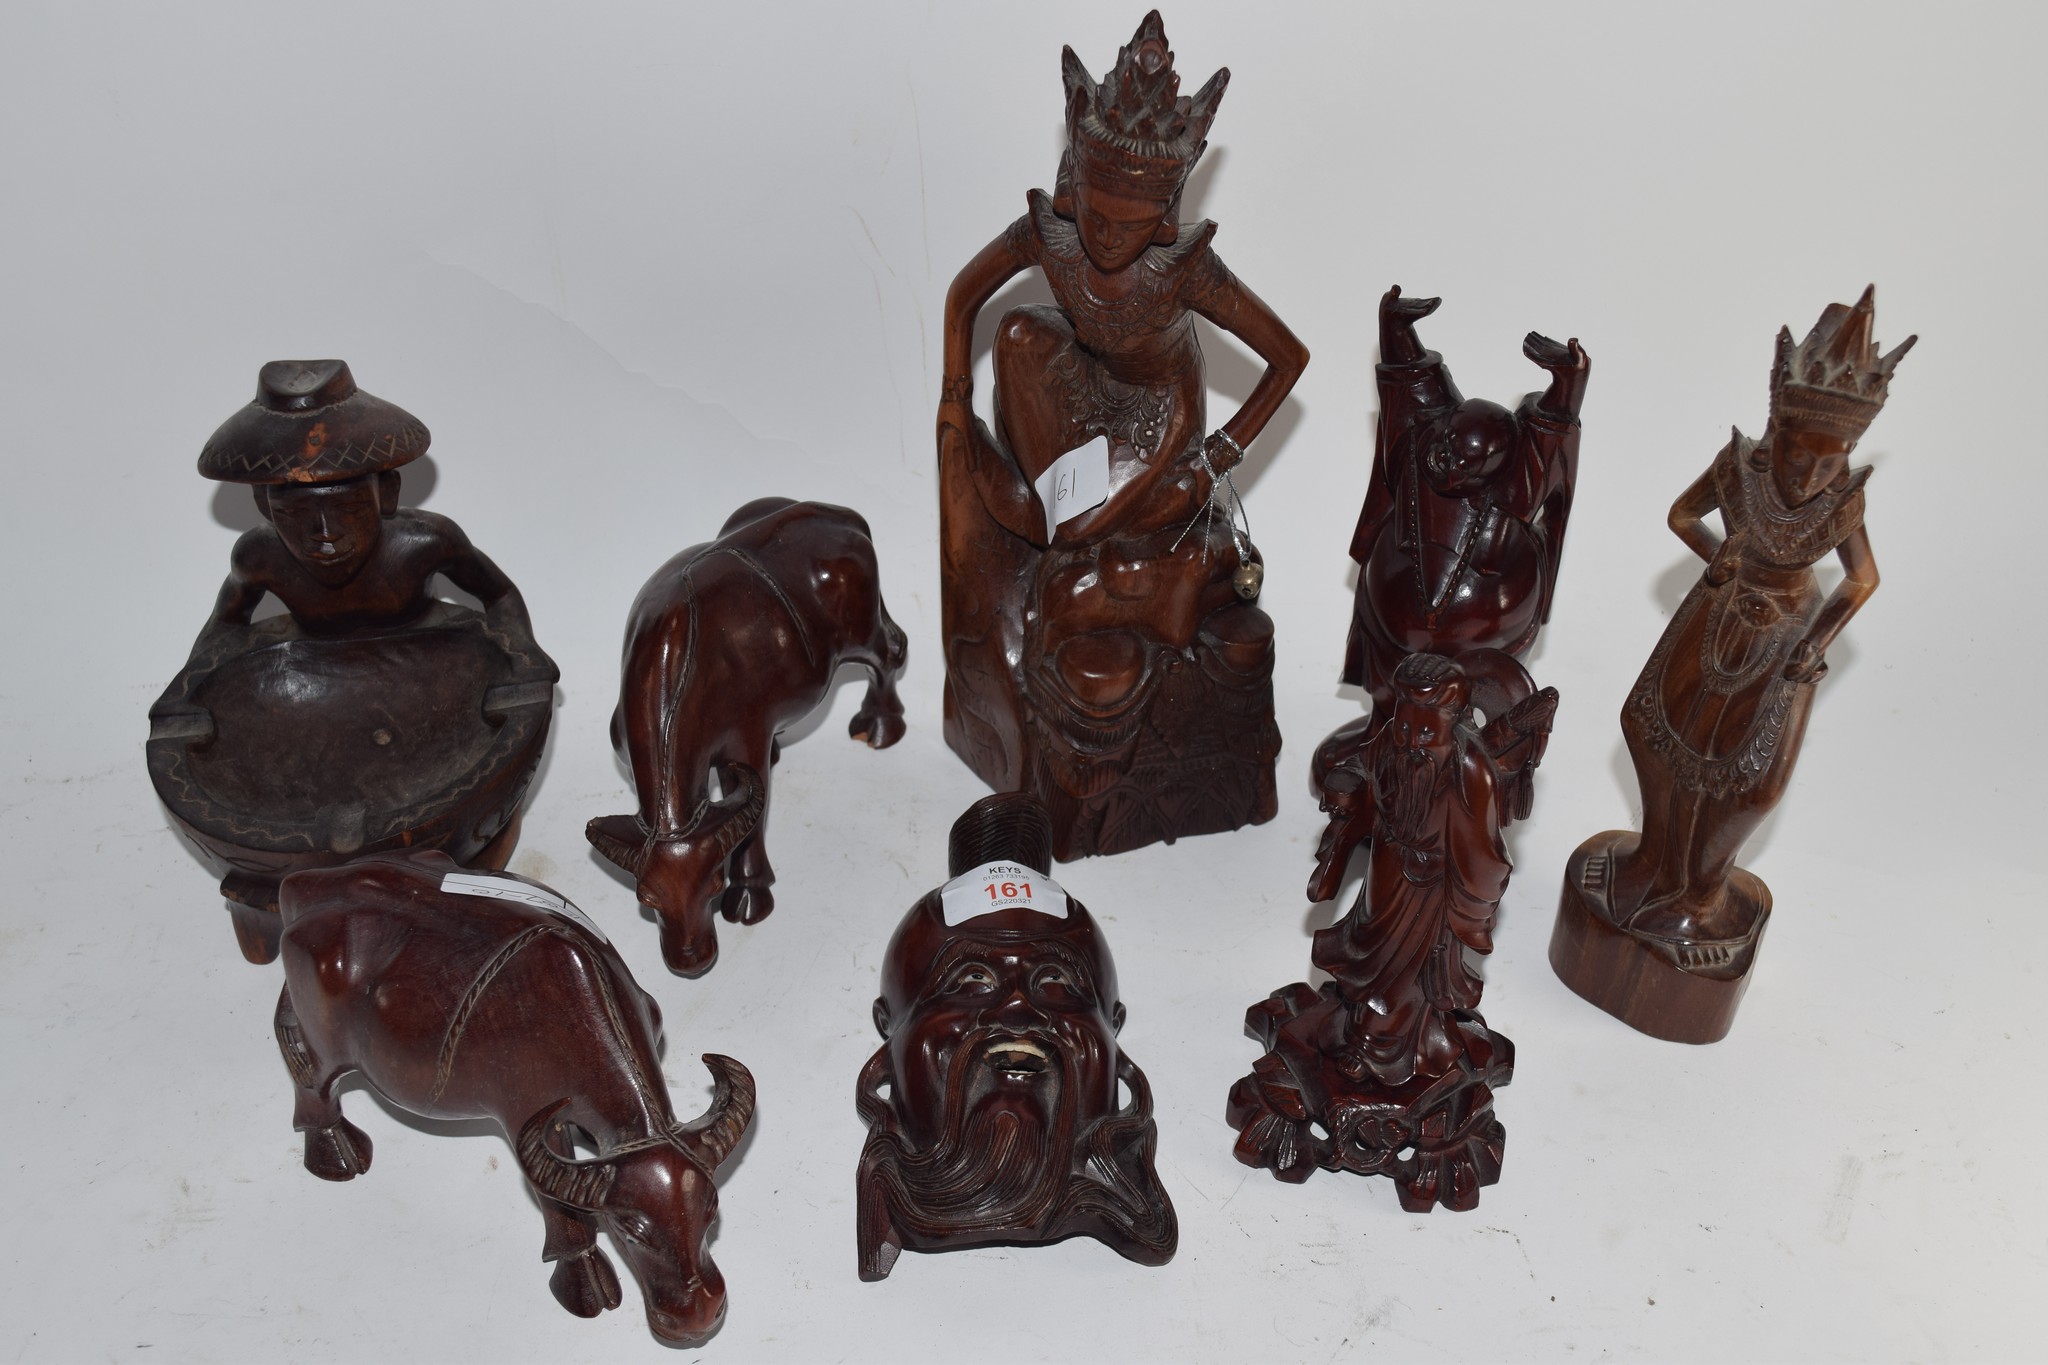 ORIENTAL ITEMS, CARVED WOODEN MODEL OF A FACE, WOODEN MODELS OF BUFFALO ETC